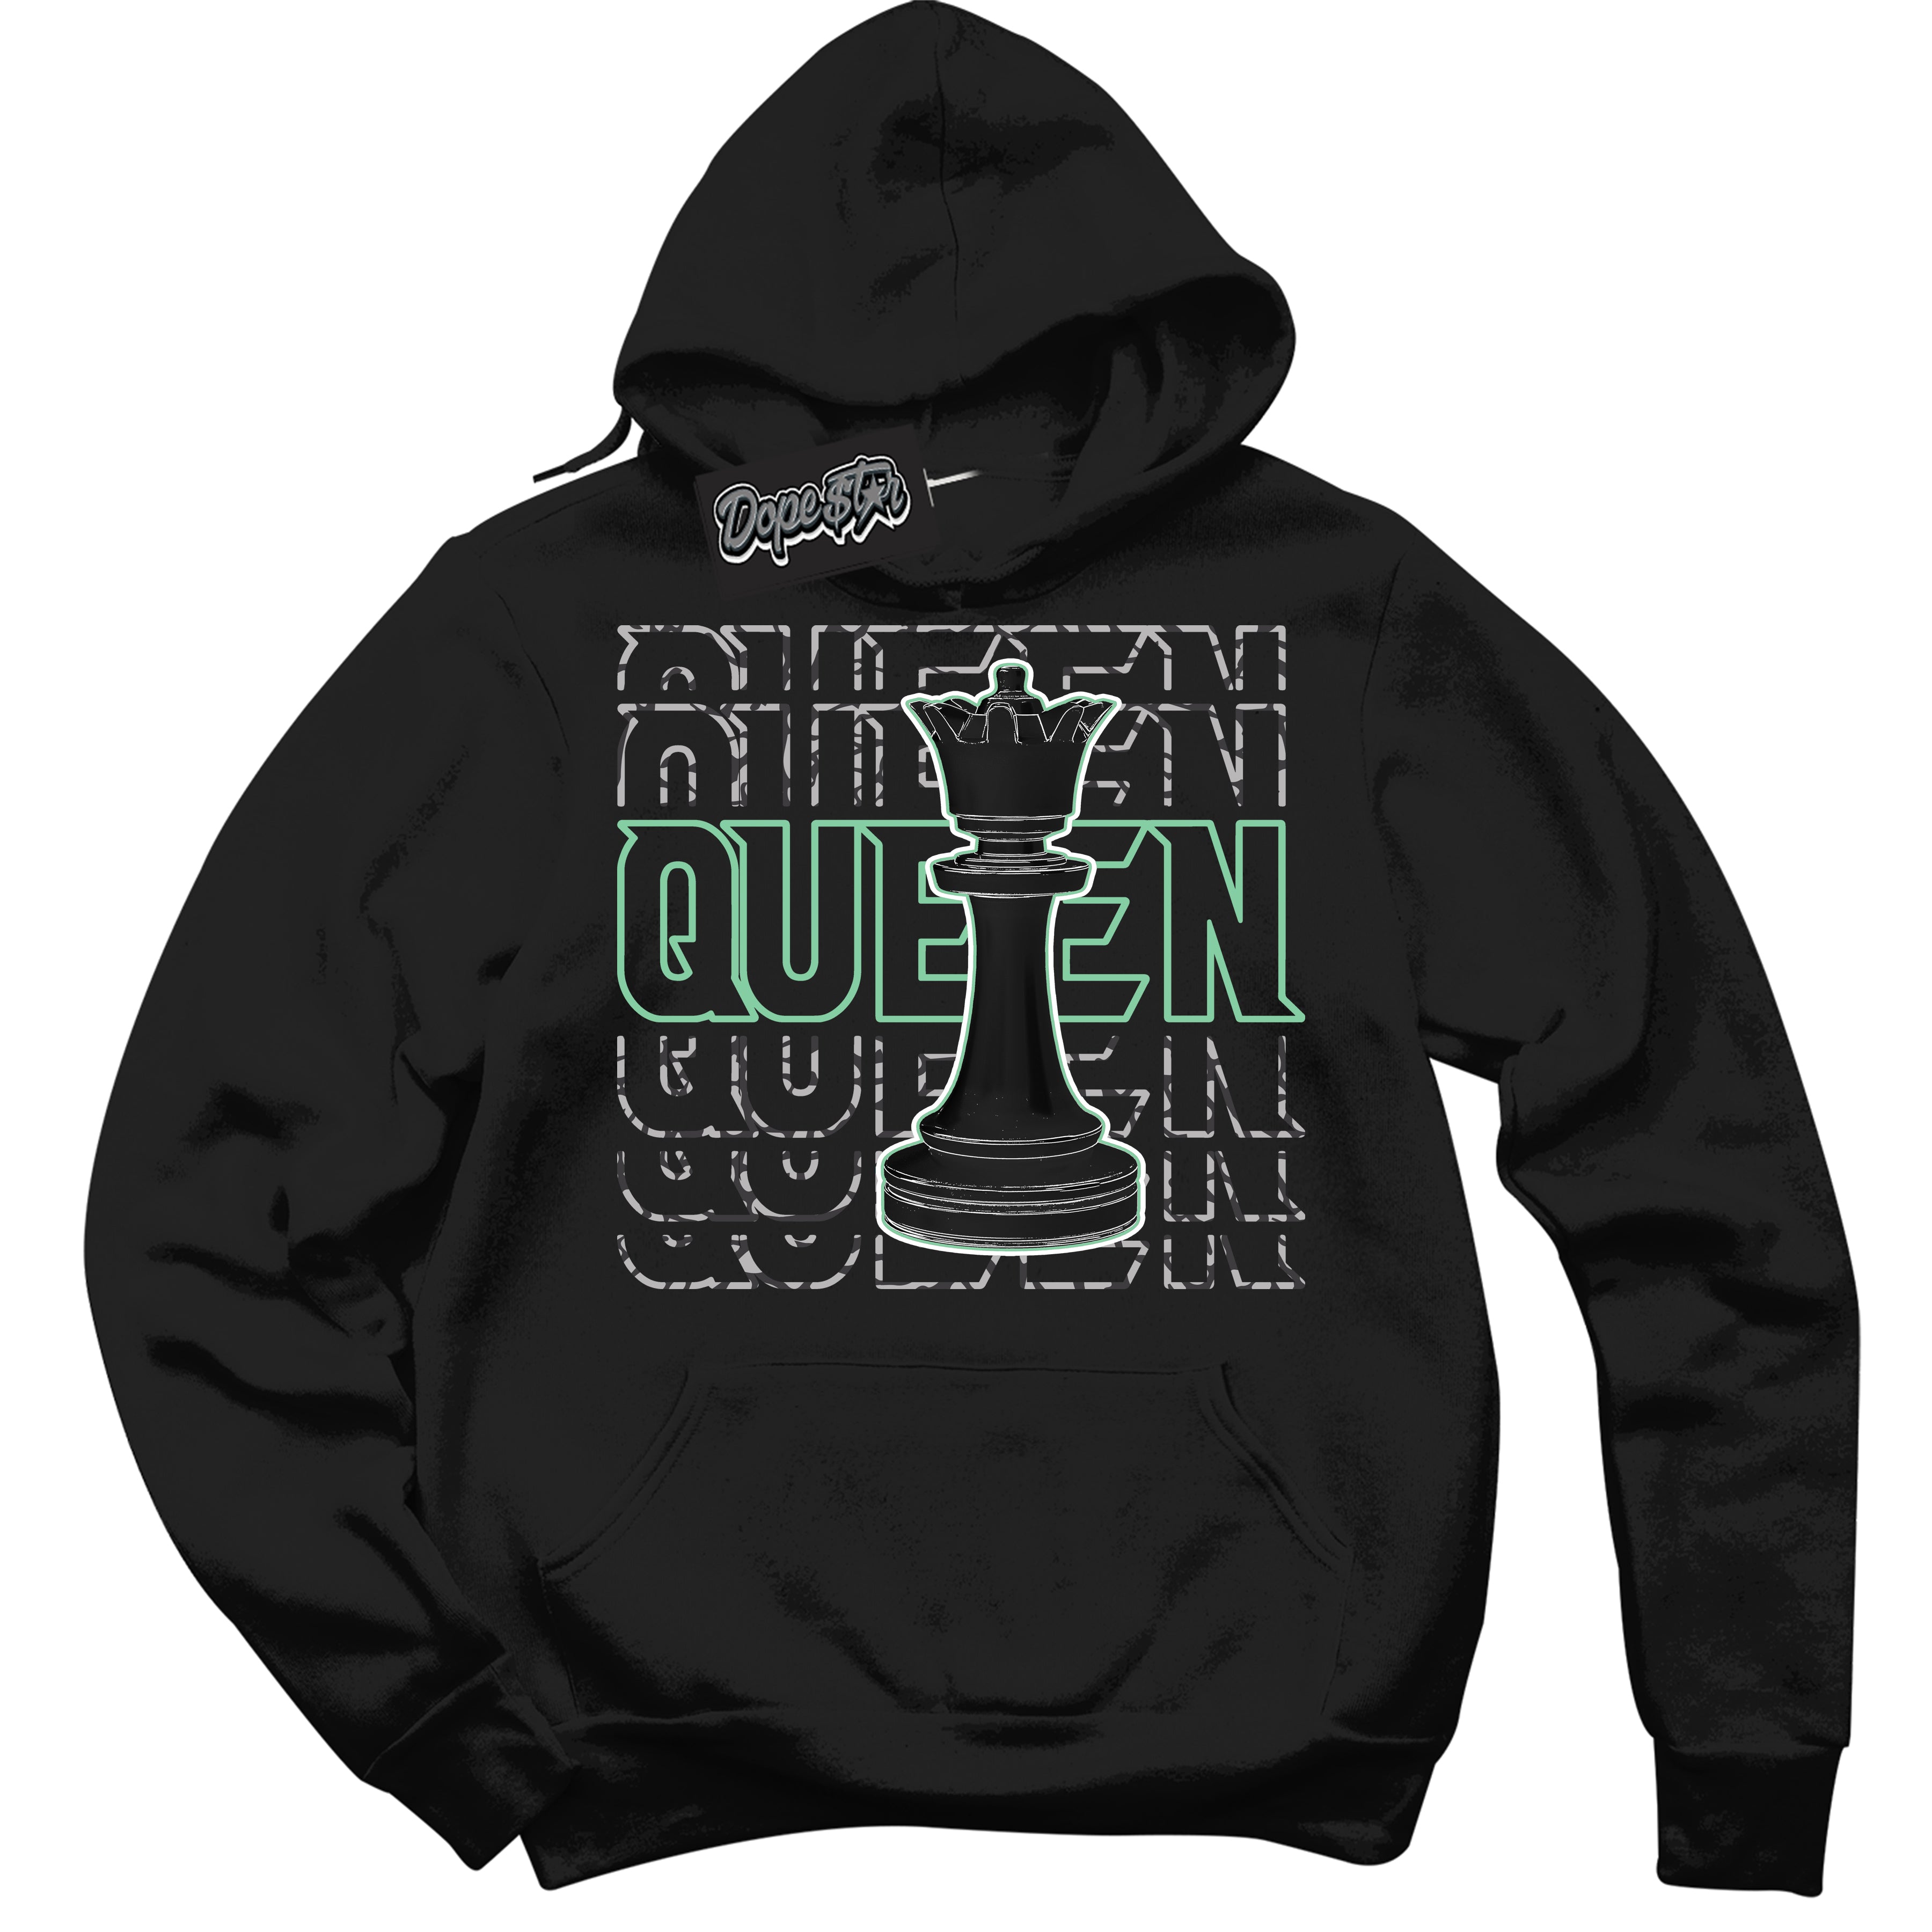 Cool Black Graphic DopeStar Hoodie with “ Queen Chess “ print, that perfectly matches Green Glow 3S sneakers